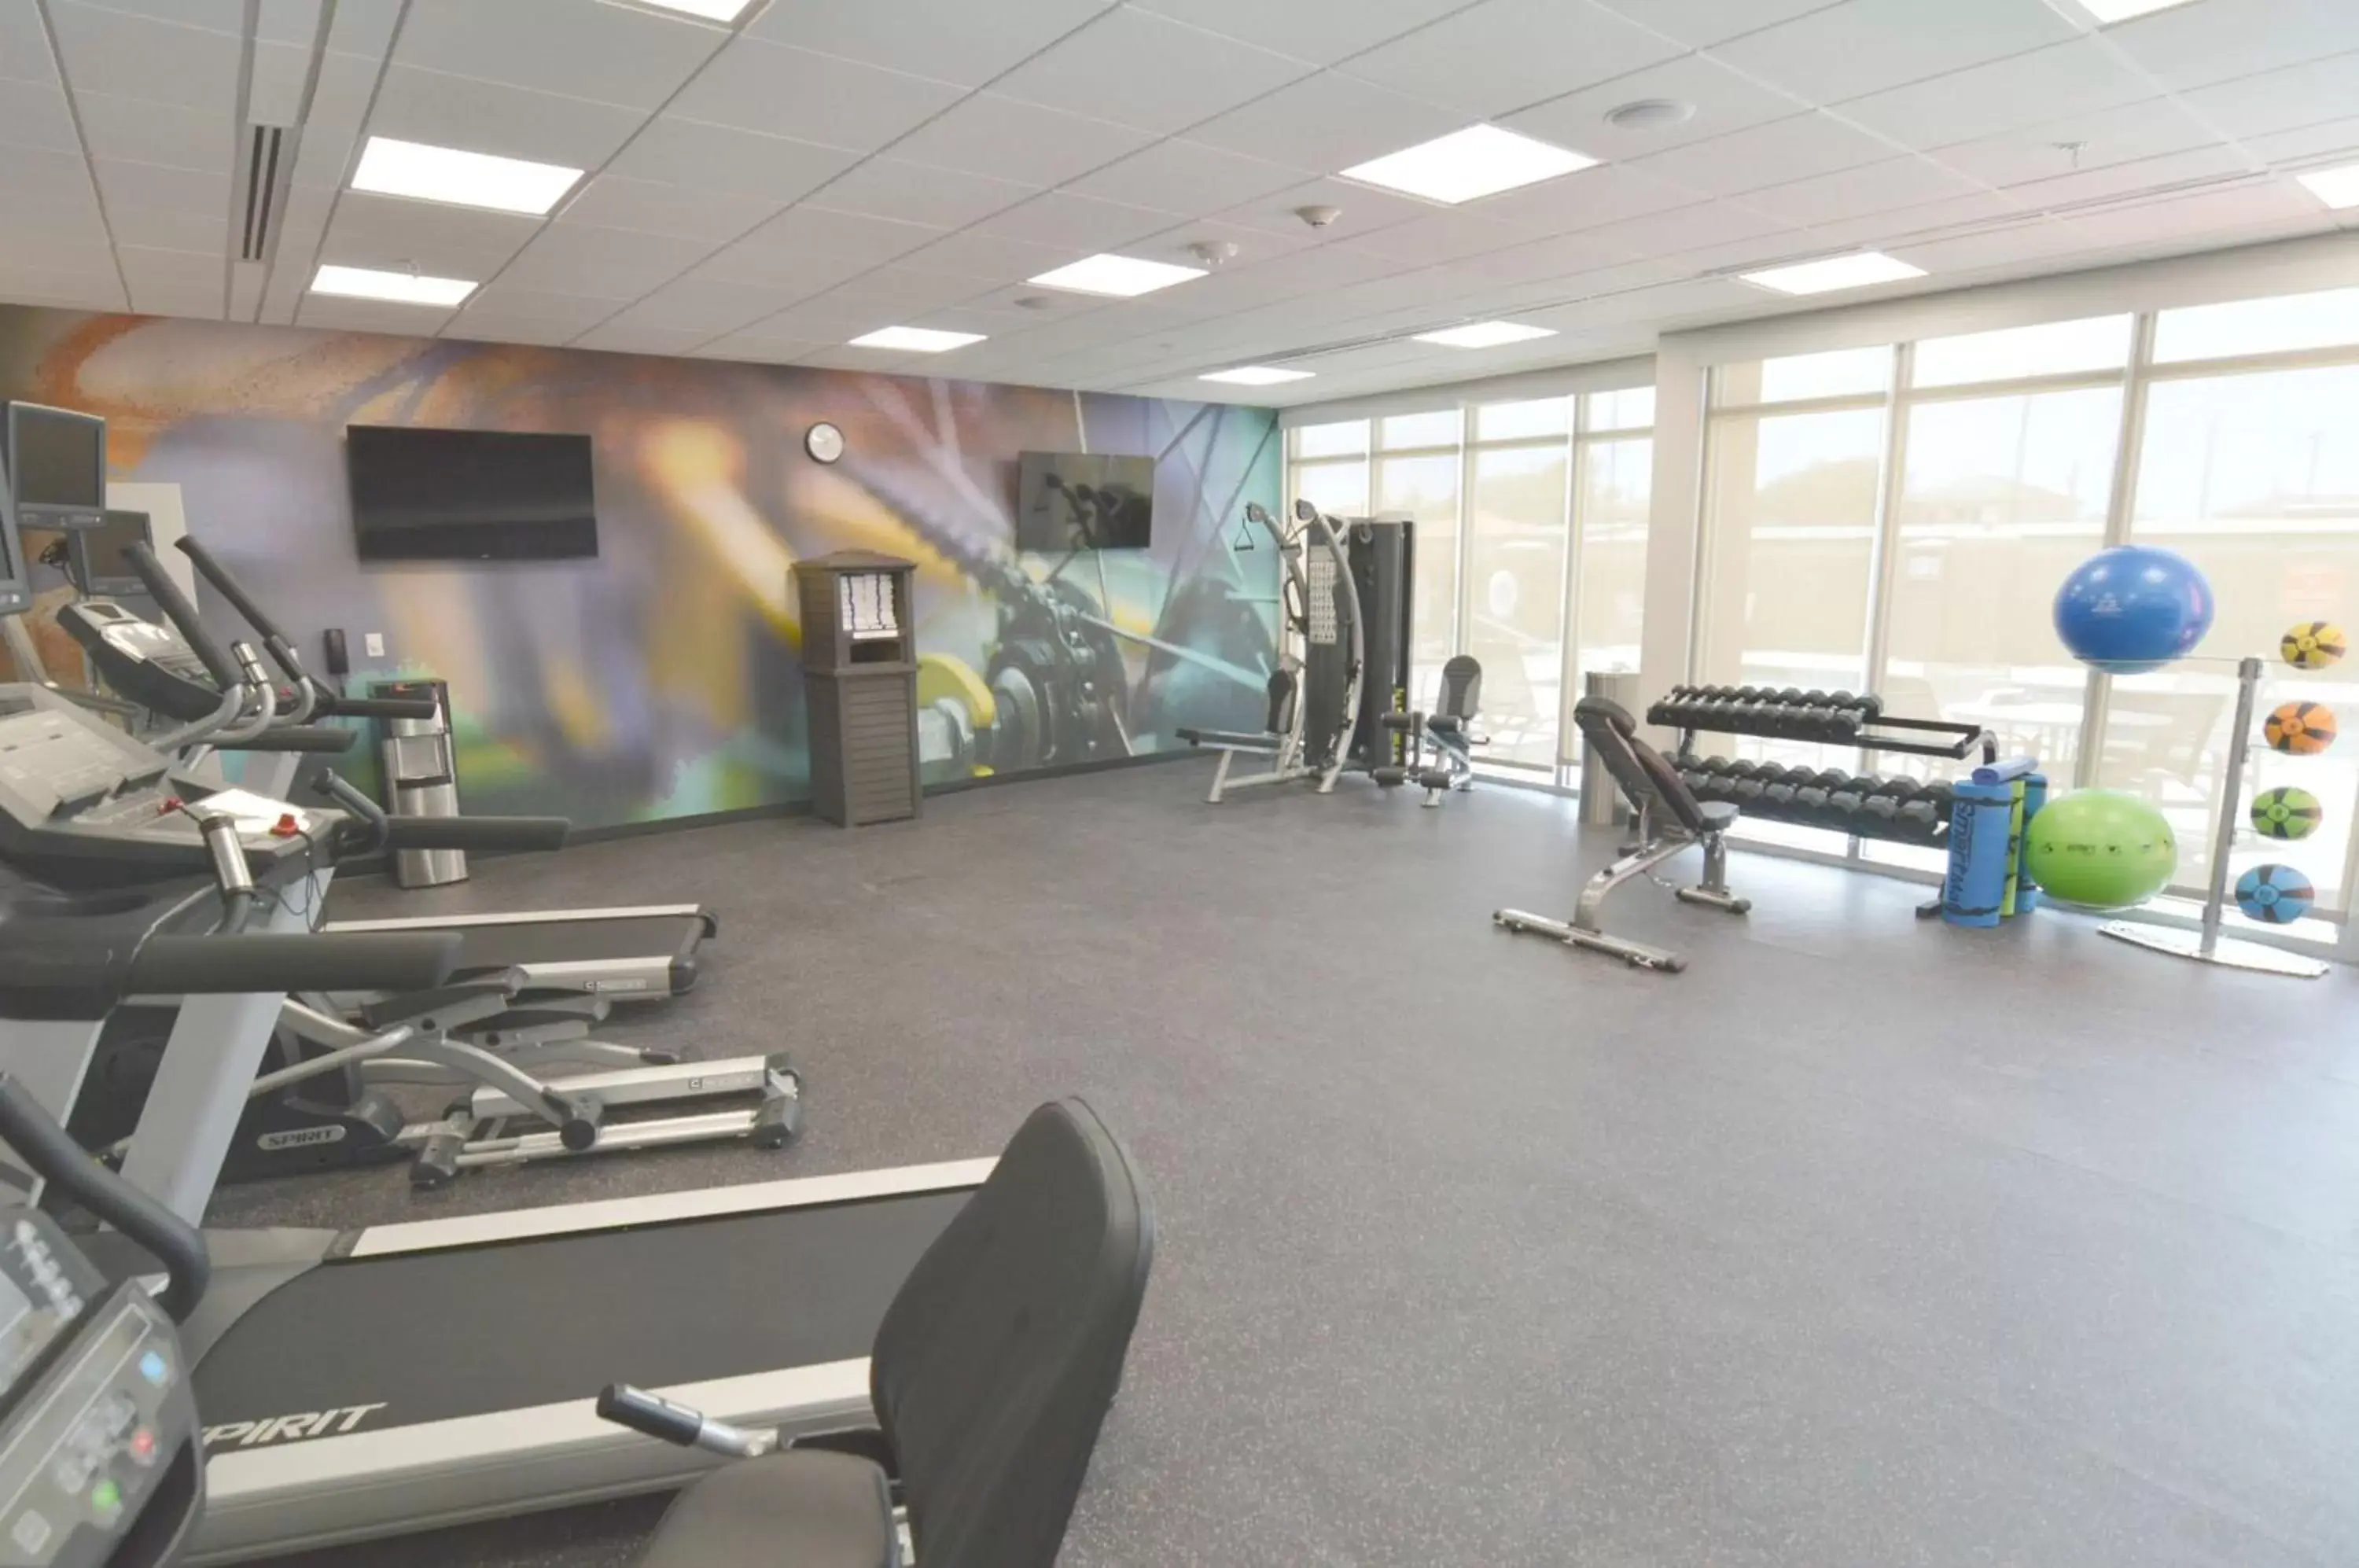 Fitness centre/facilities, Fitness Center/Facilities in Best Western Executive Residency IH-37 Corpus Christi